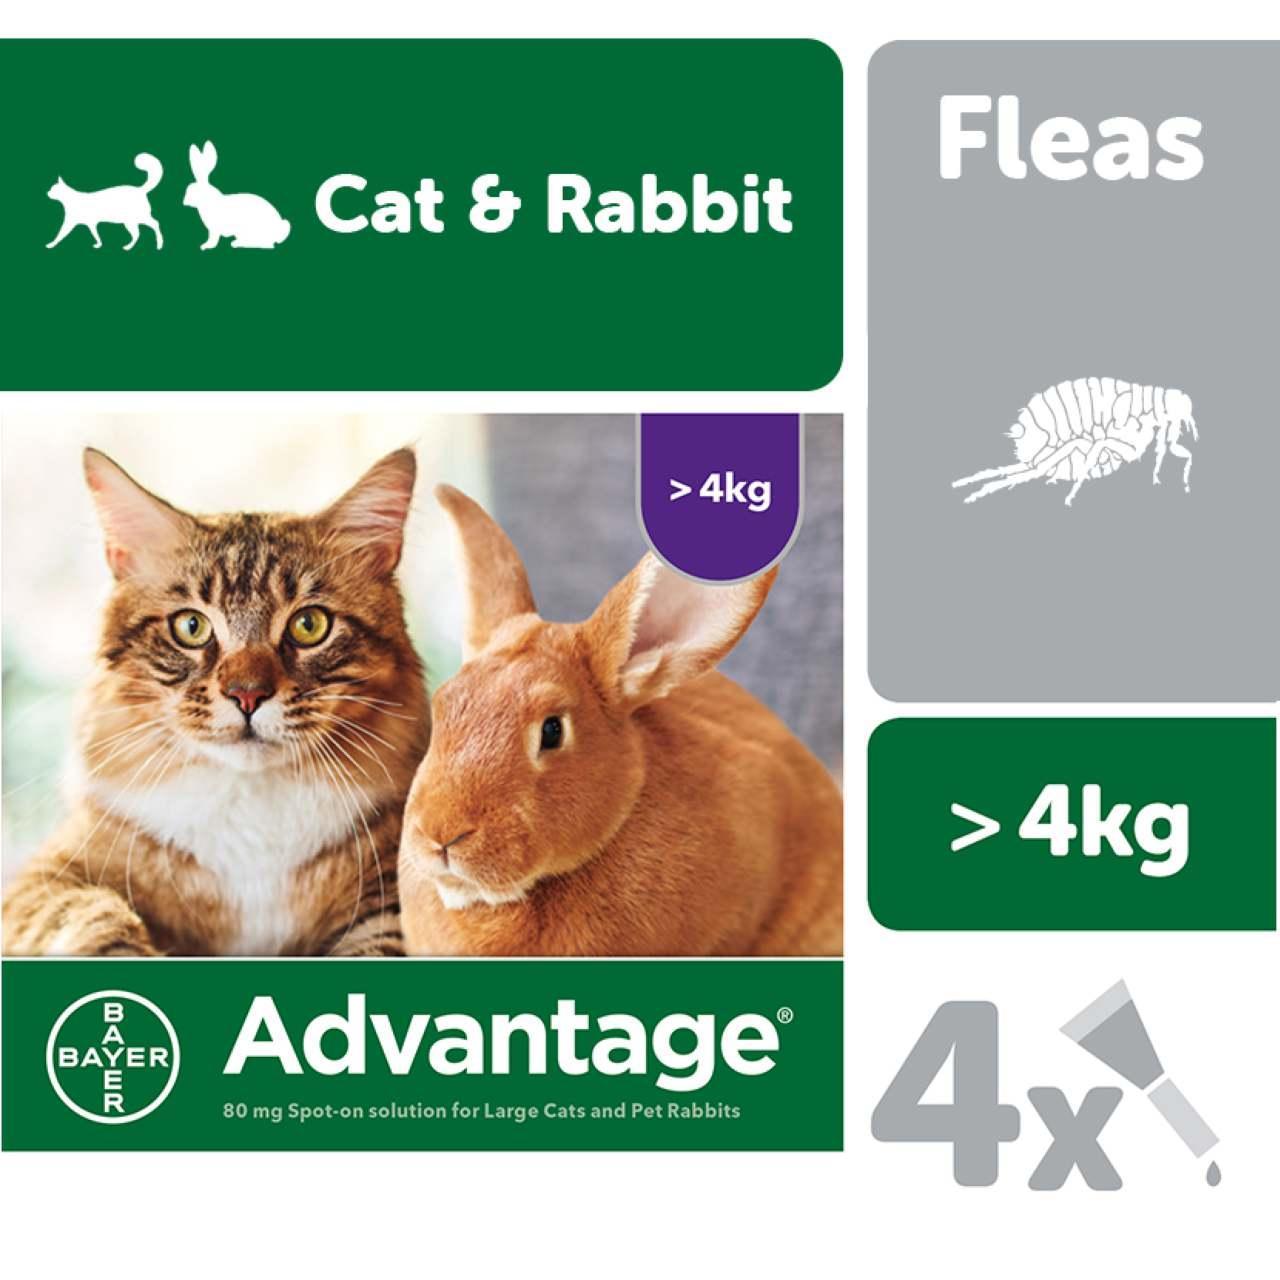 An image of Advantage 80 Spot On for Large Cats & Rabbits over 4Kg